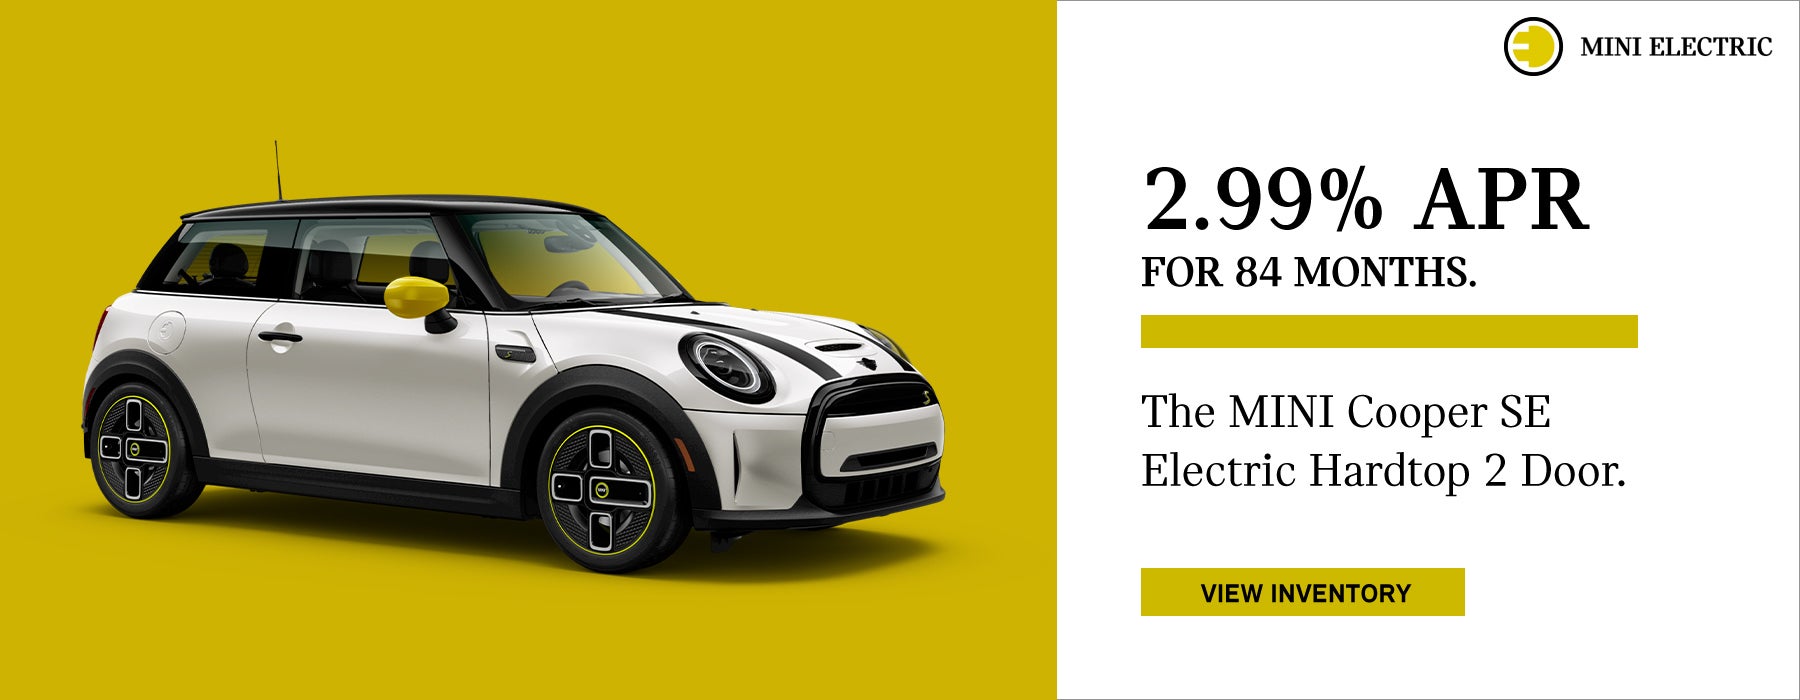 Right side view of MINI Electric on yellow background